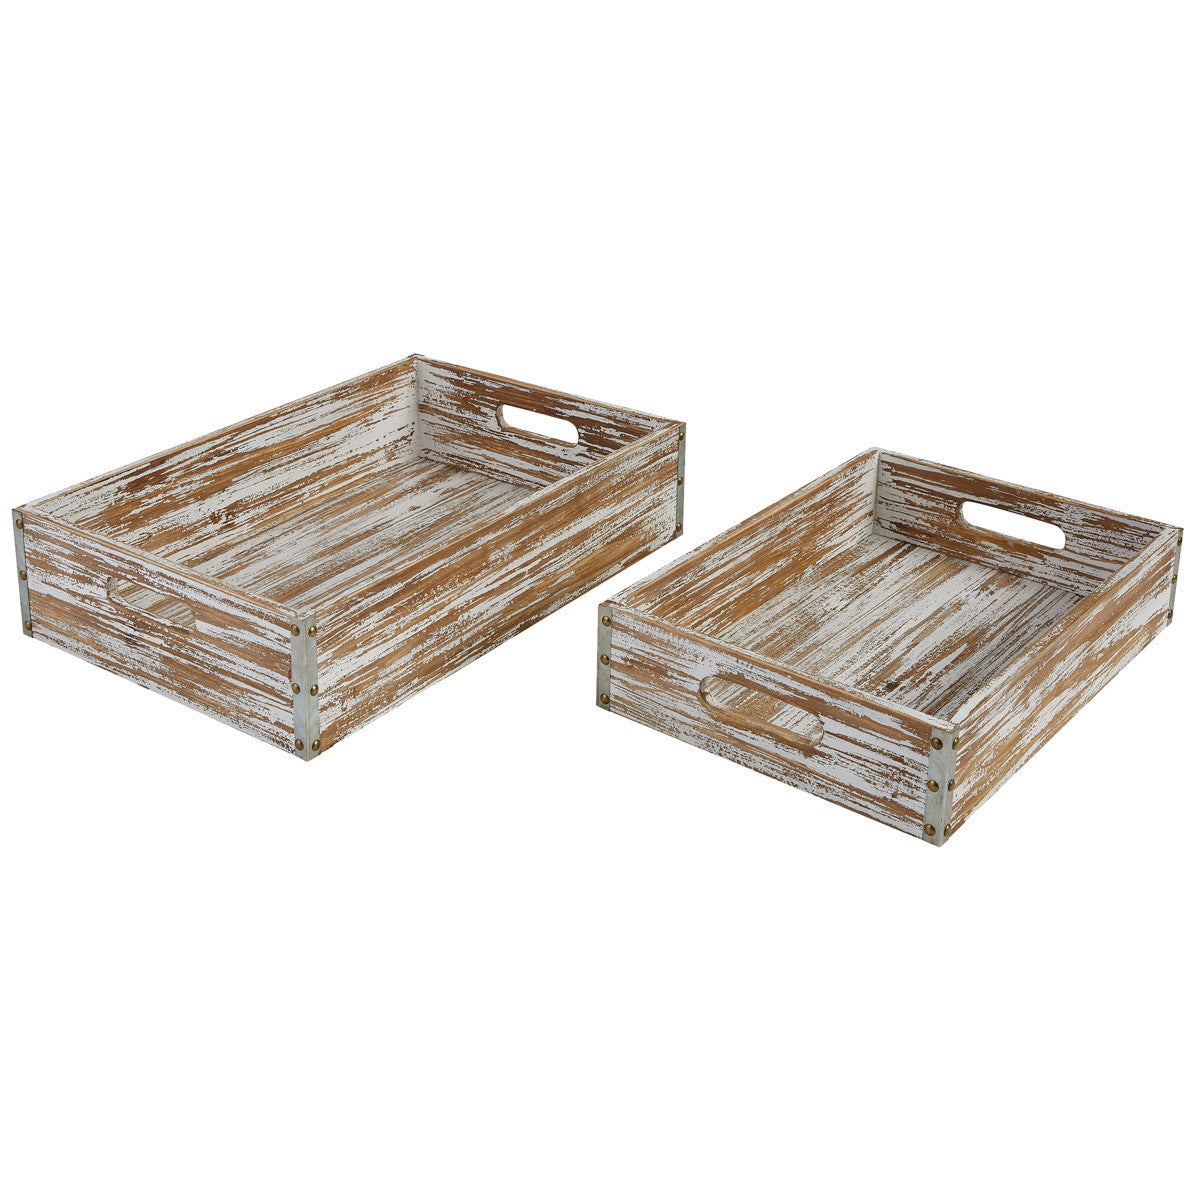 Distressed Wood Table Crates - Set of 2 Park Designs